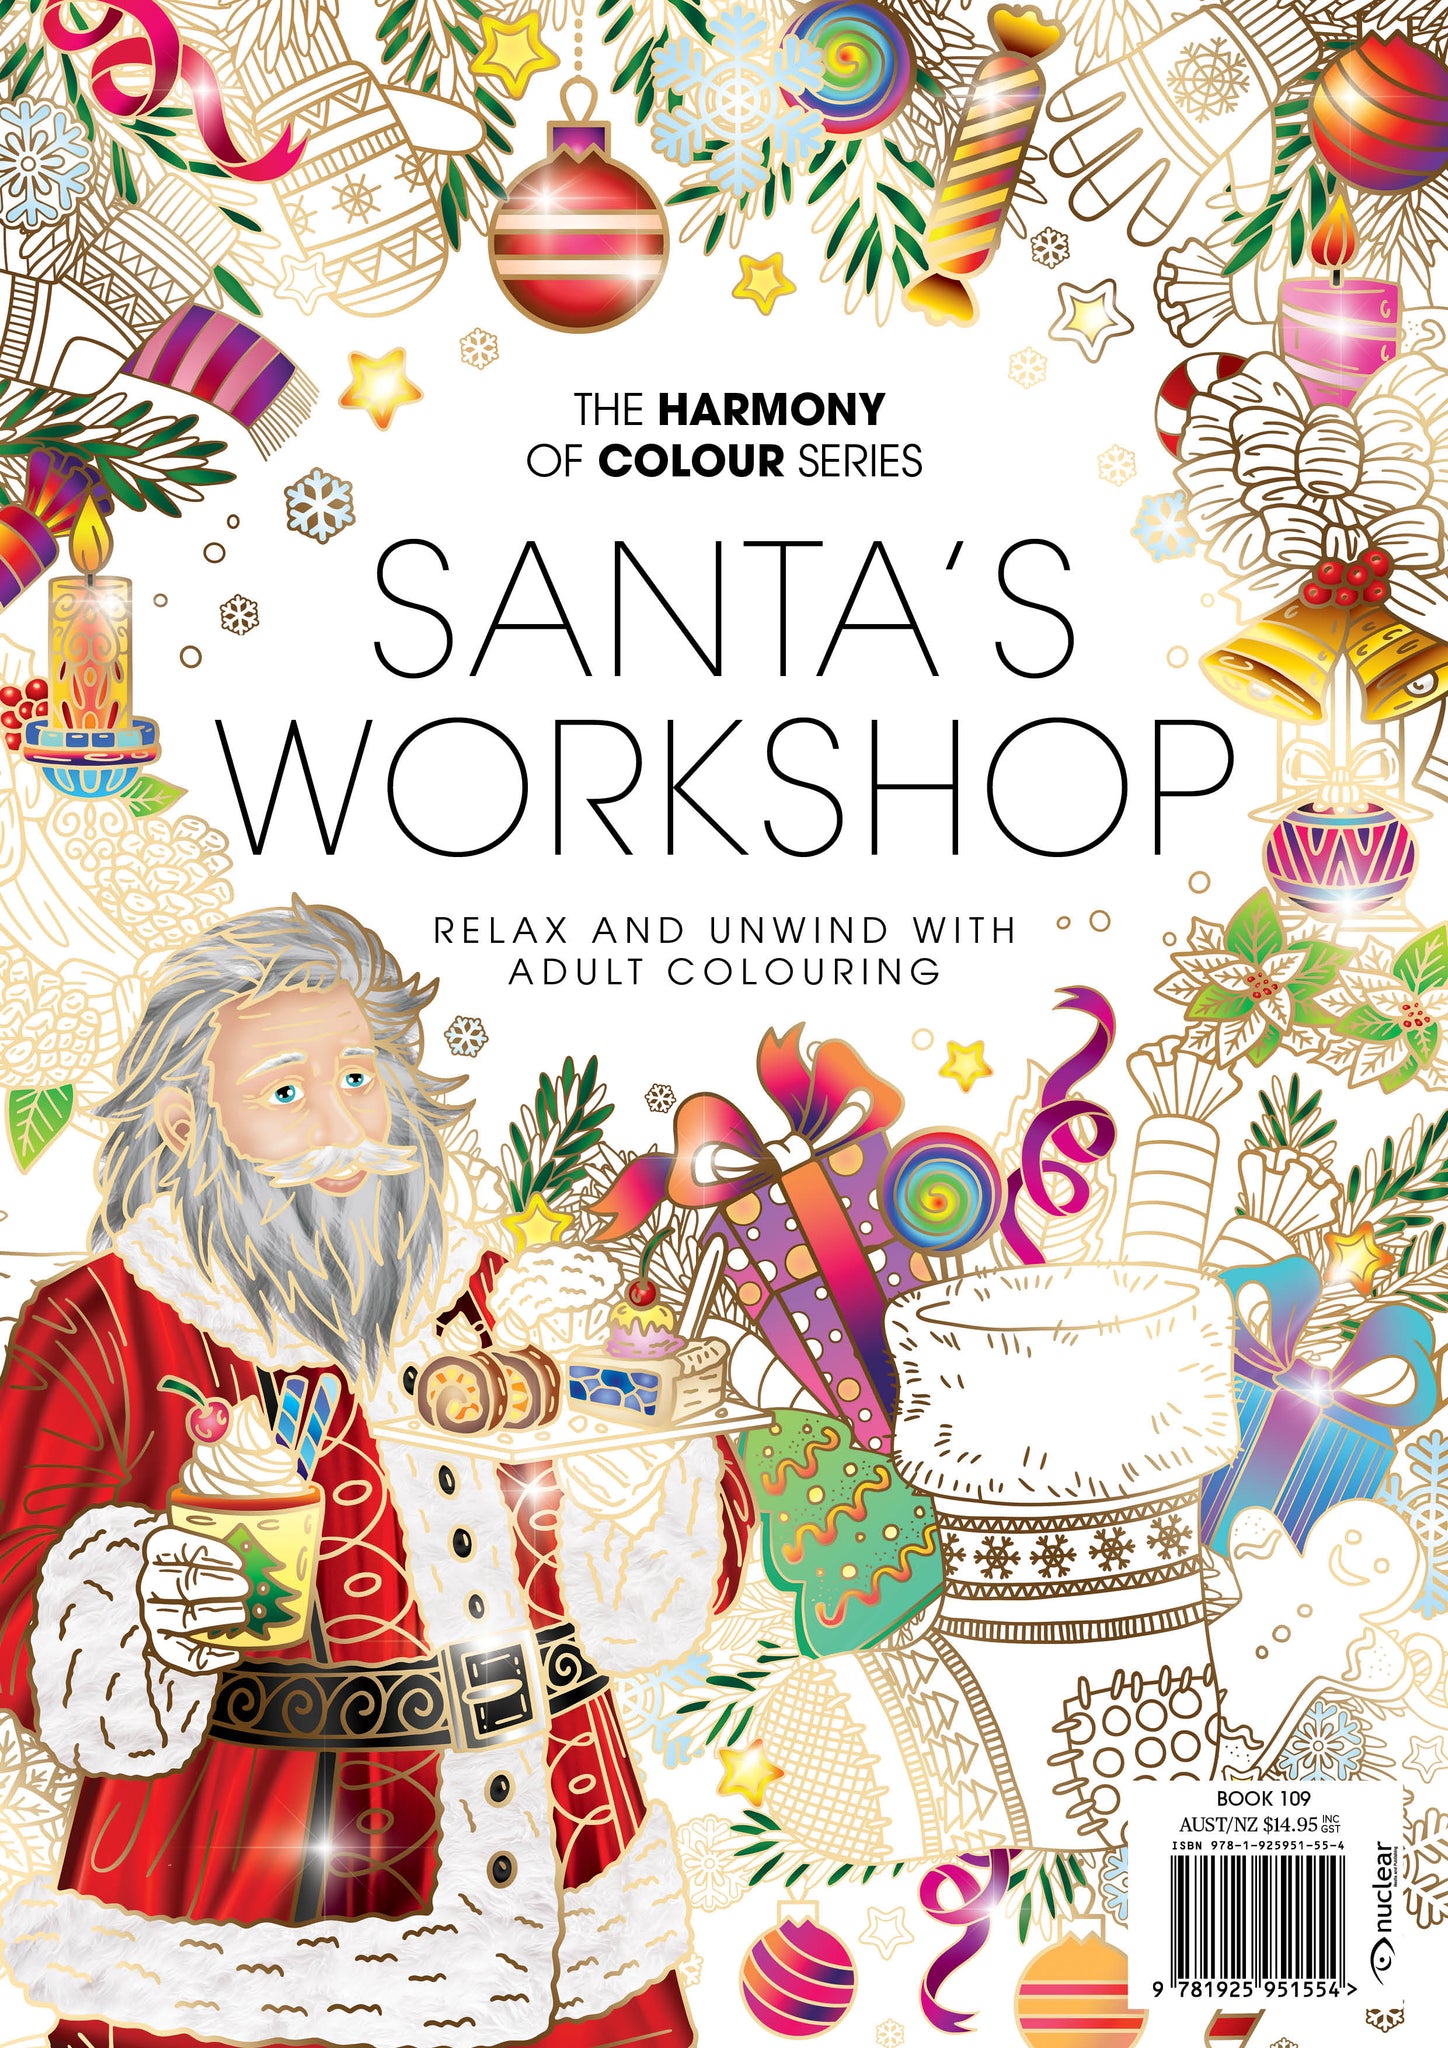 109. Harmony of Colour Book One Hundred and Nine: Santa's Workshop (PRINTABLE DIGITAL EDITION ALSO AVAILABLE!)